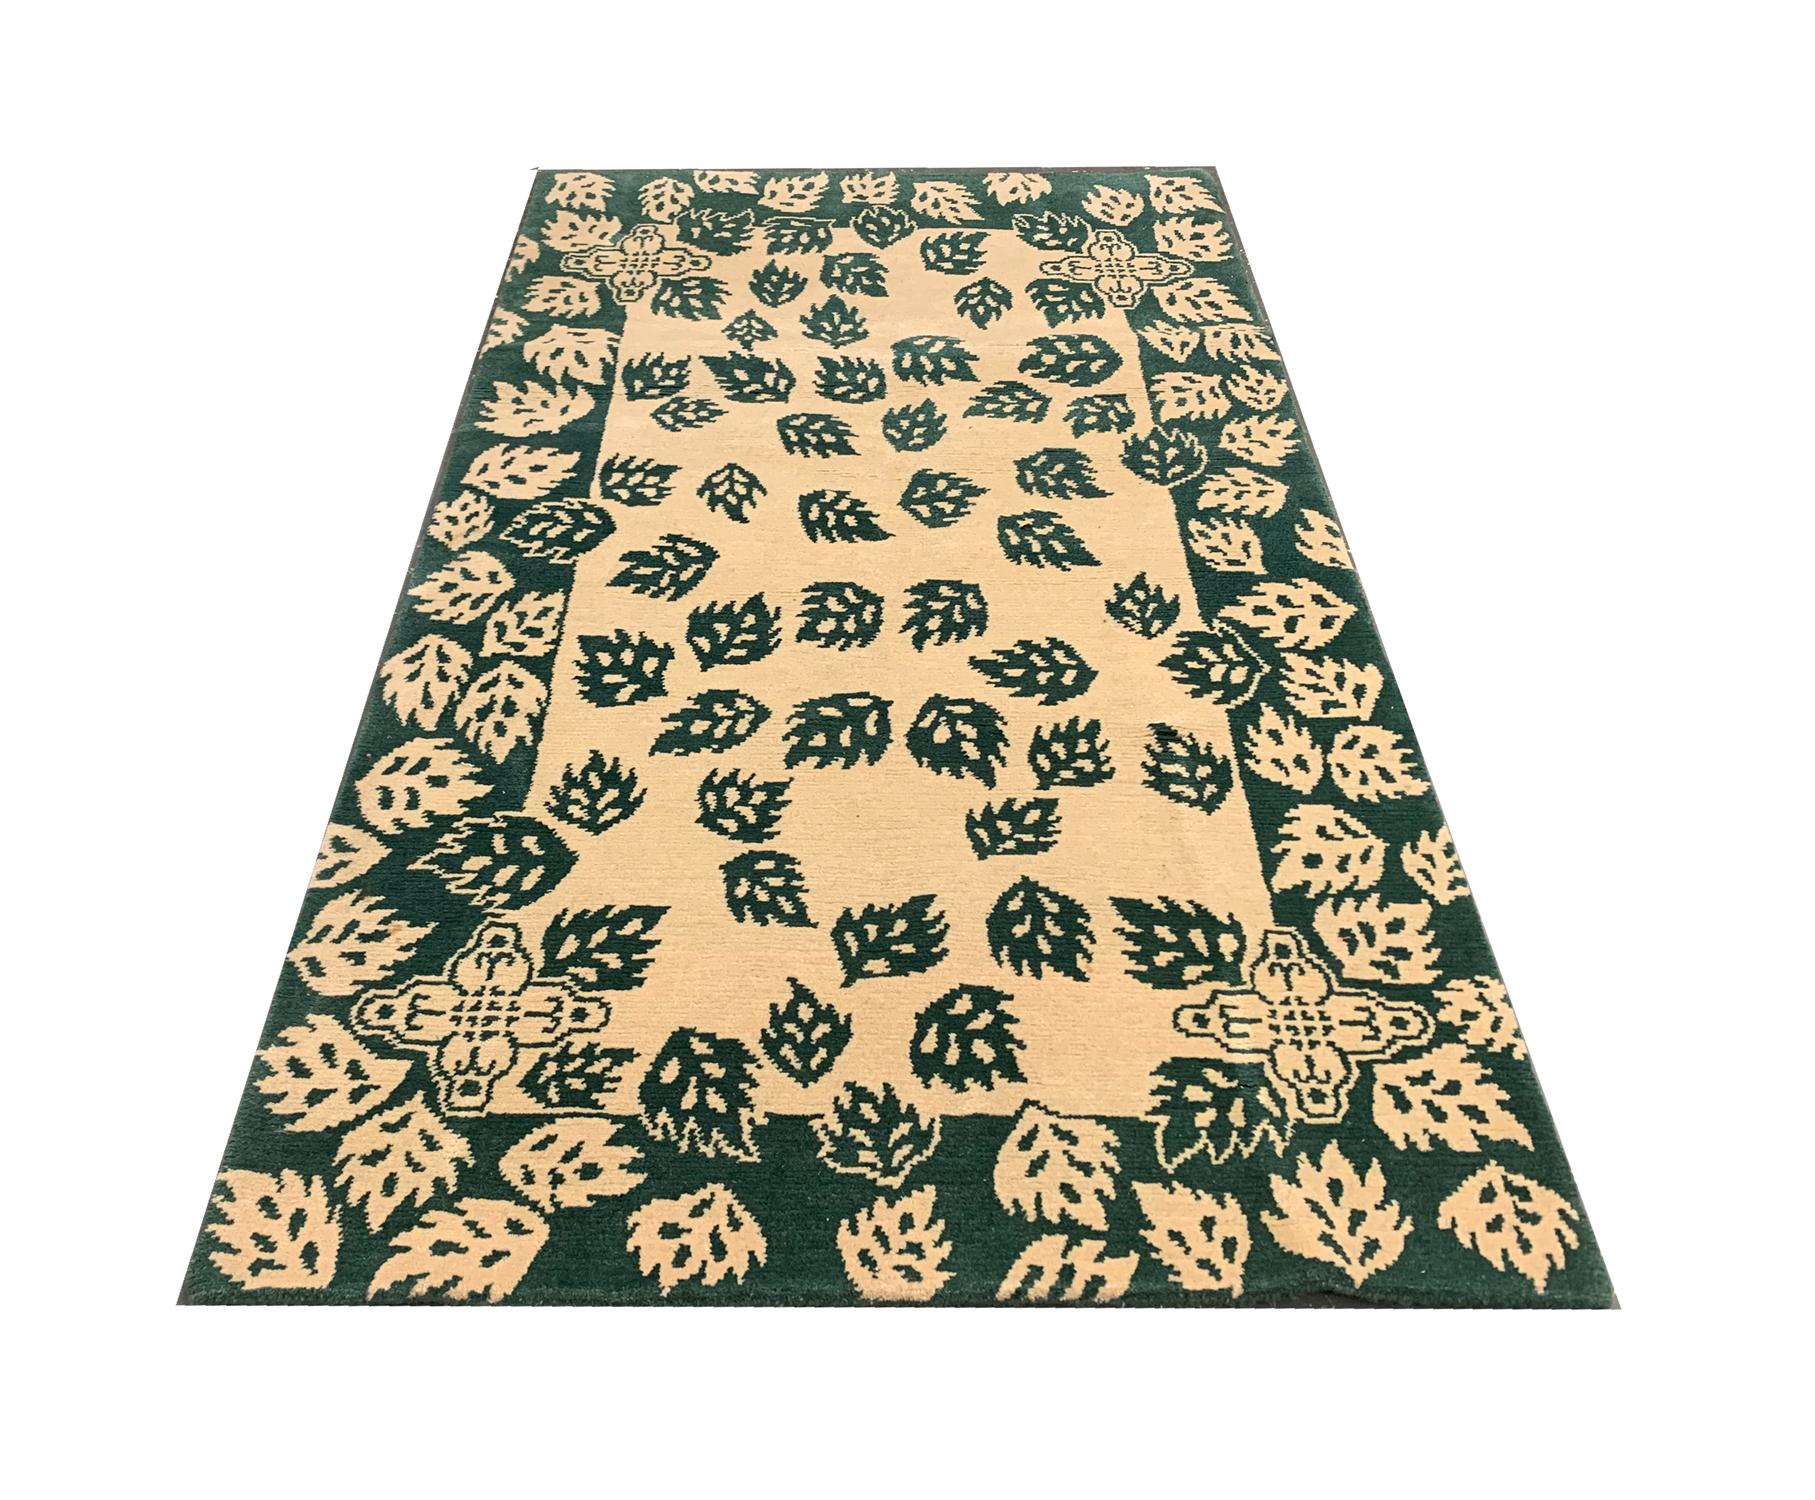 This wool pile carpet is an antique piece woven by hand in India in the early 20th century. The design features a simple colour palette of green and cream and has been composed with a symmetrical leaf pattern through the centre and a repeating leaf